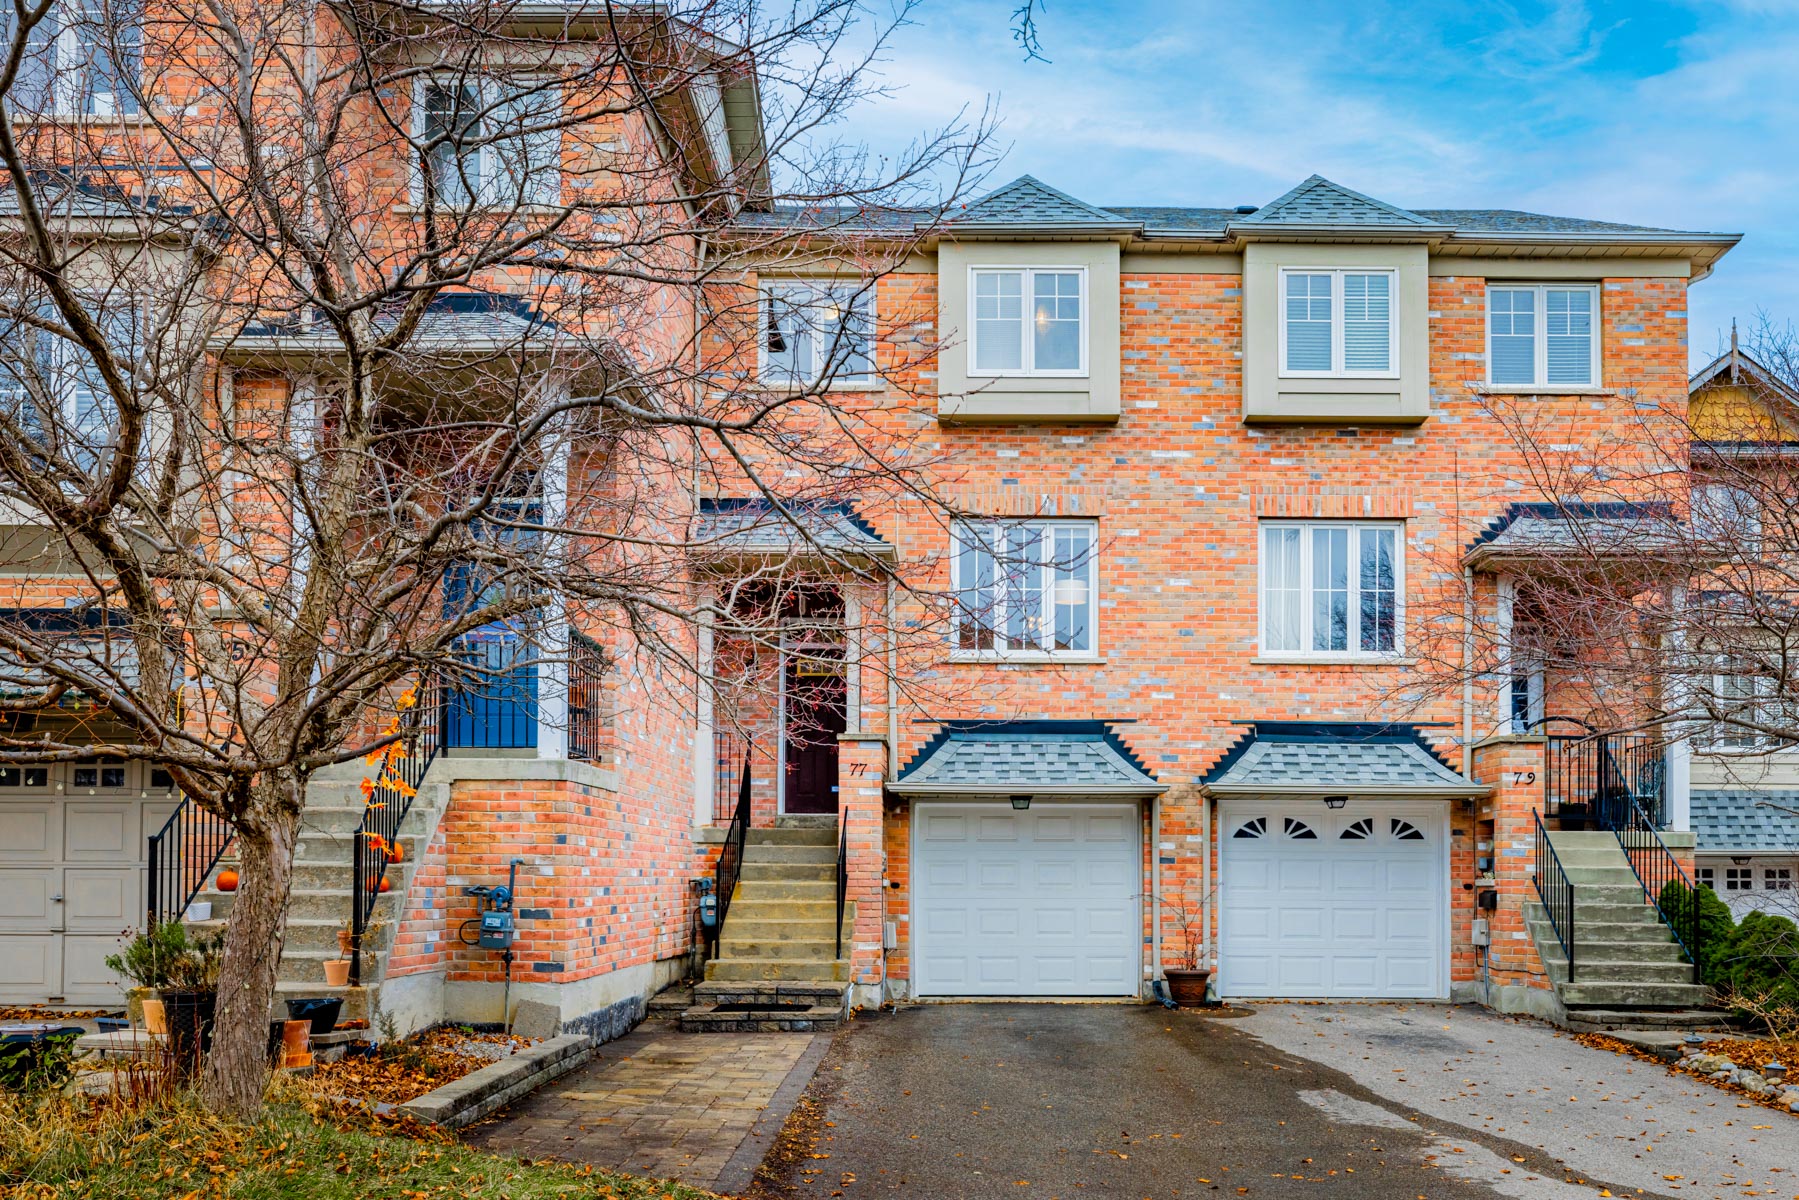 Front of 77 Schouten Cres, a 2-storey townhouse with red-brick facade and square windows.